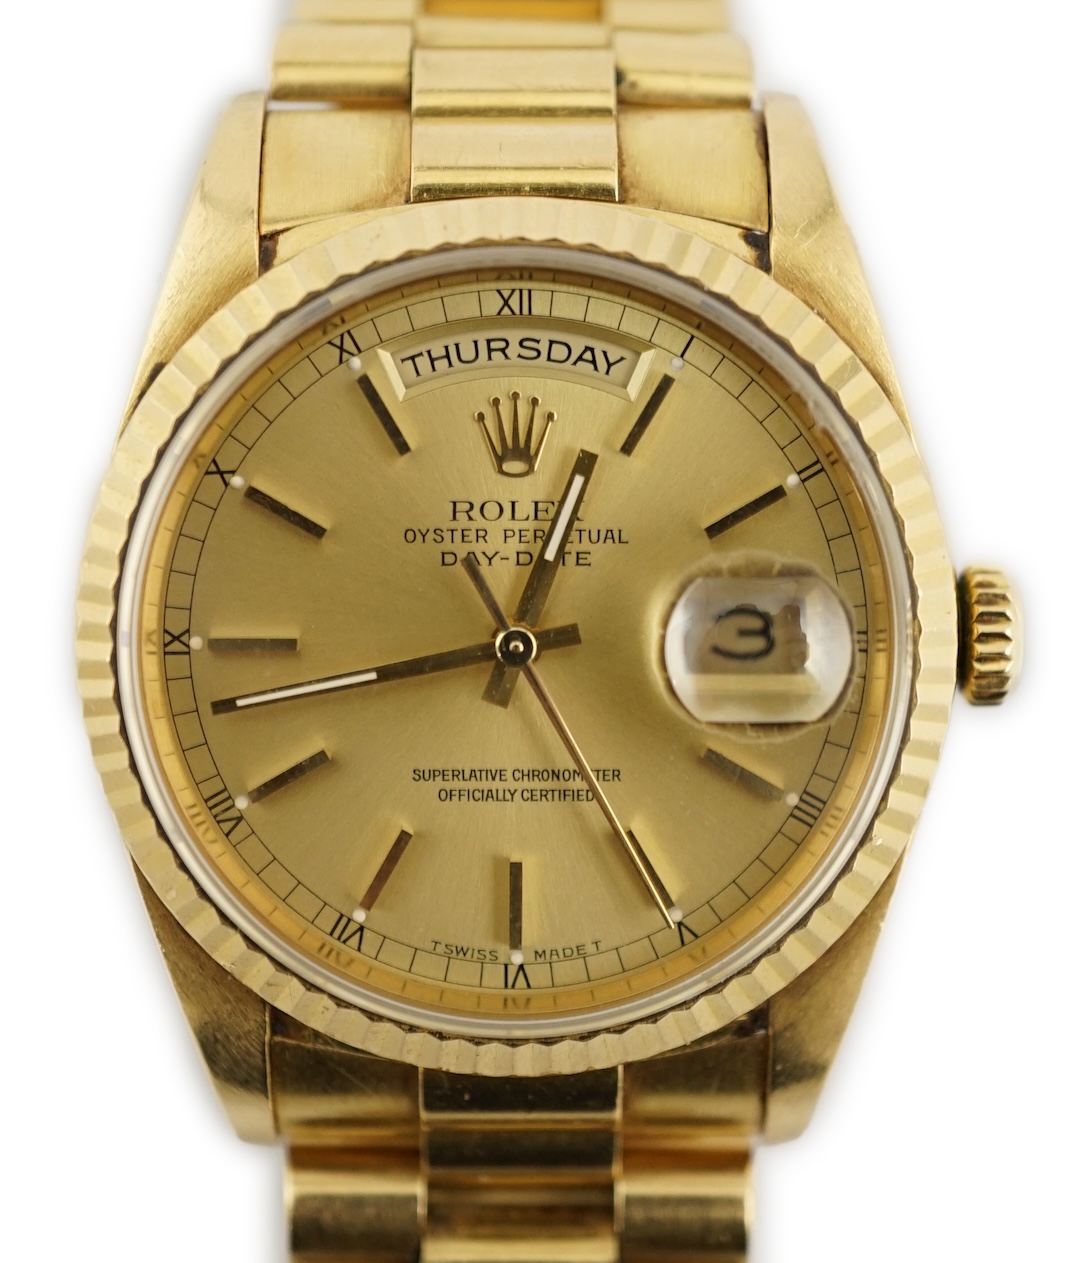 A gentleman's late 1980's 18ct gold Rolex Oyster Perpetual Day/Date wrist watch, on an 18ct gold Rolex bracelet with deployment clasp